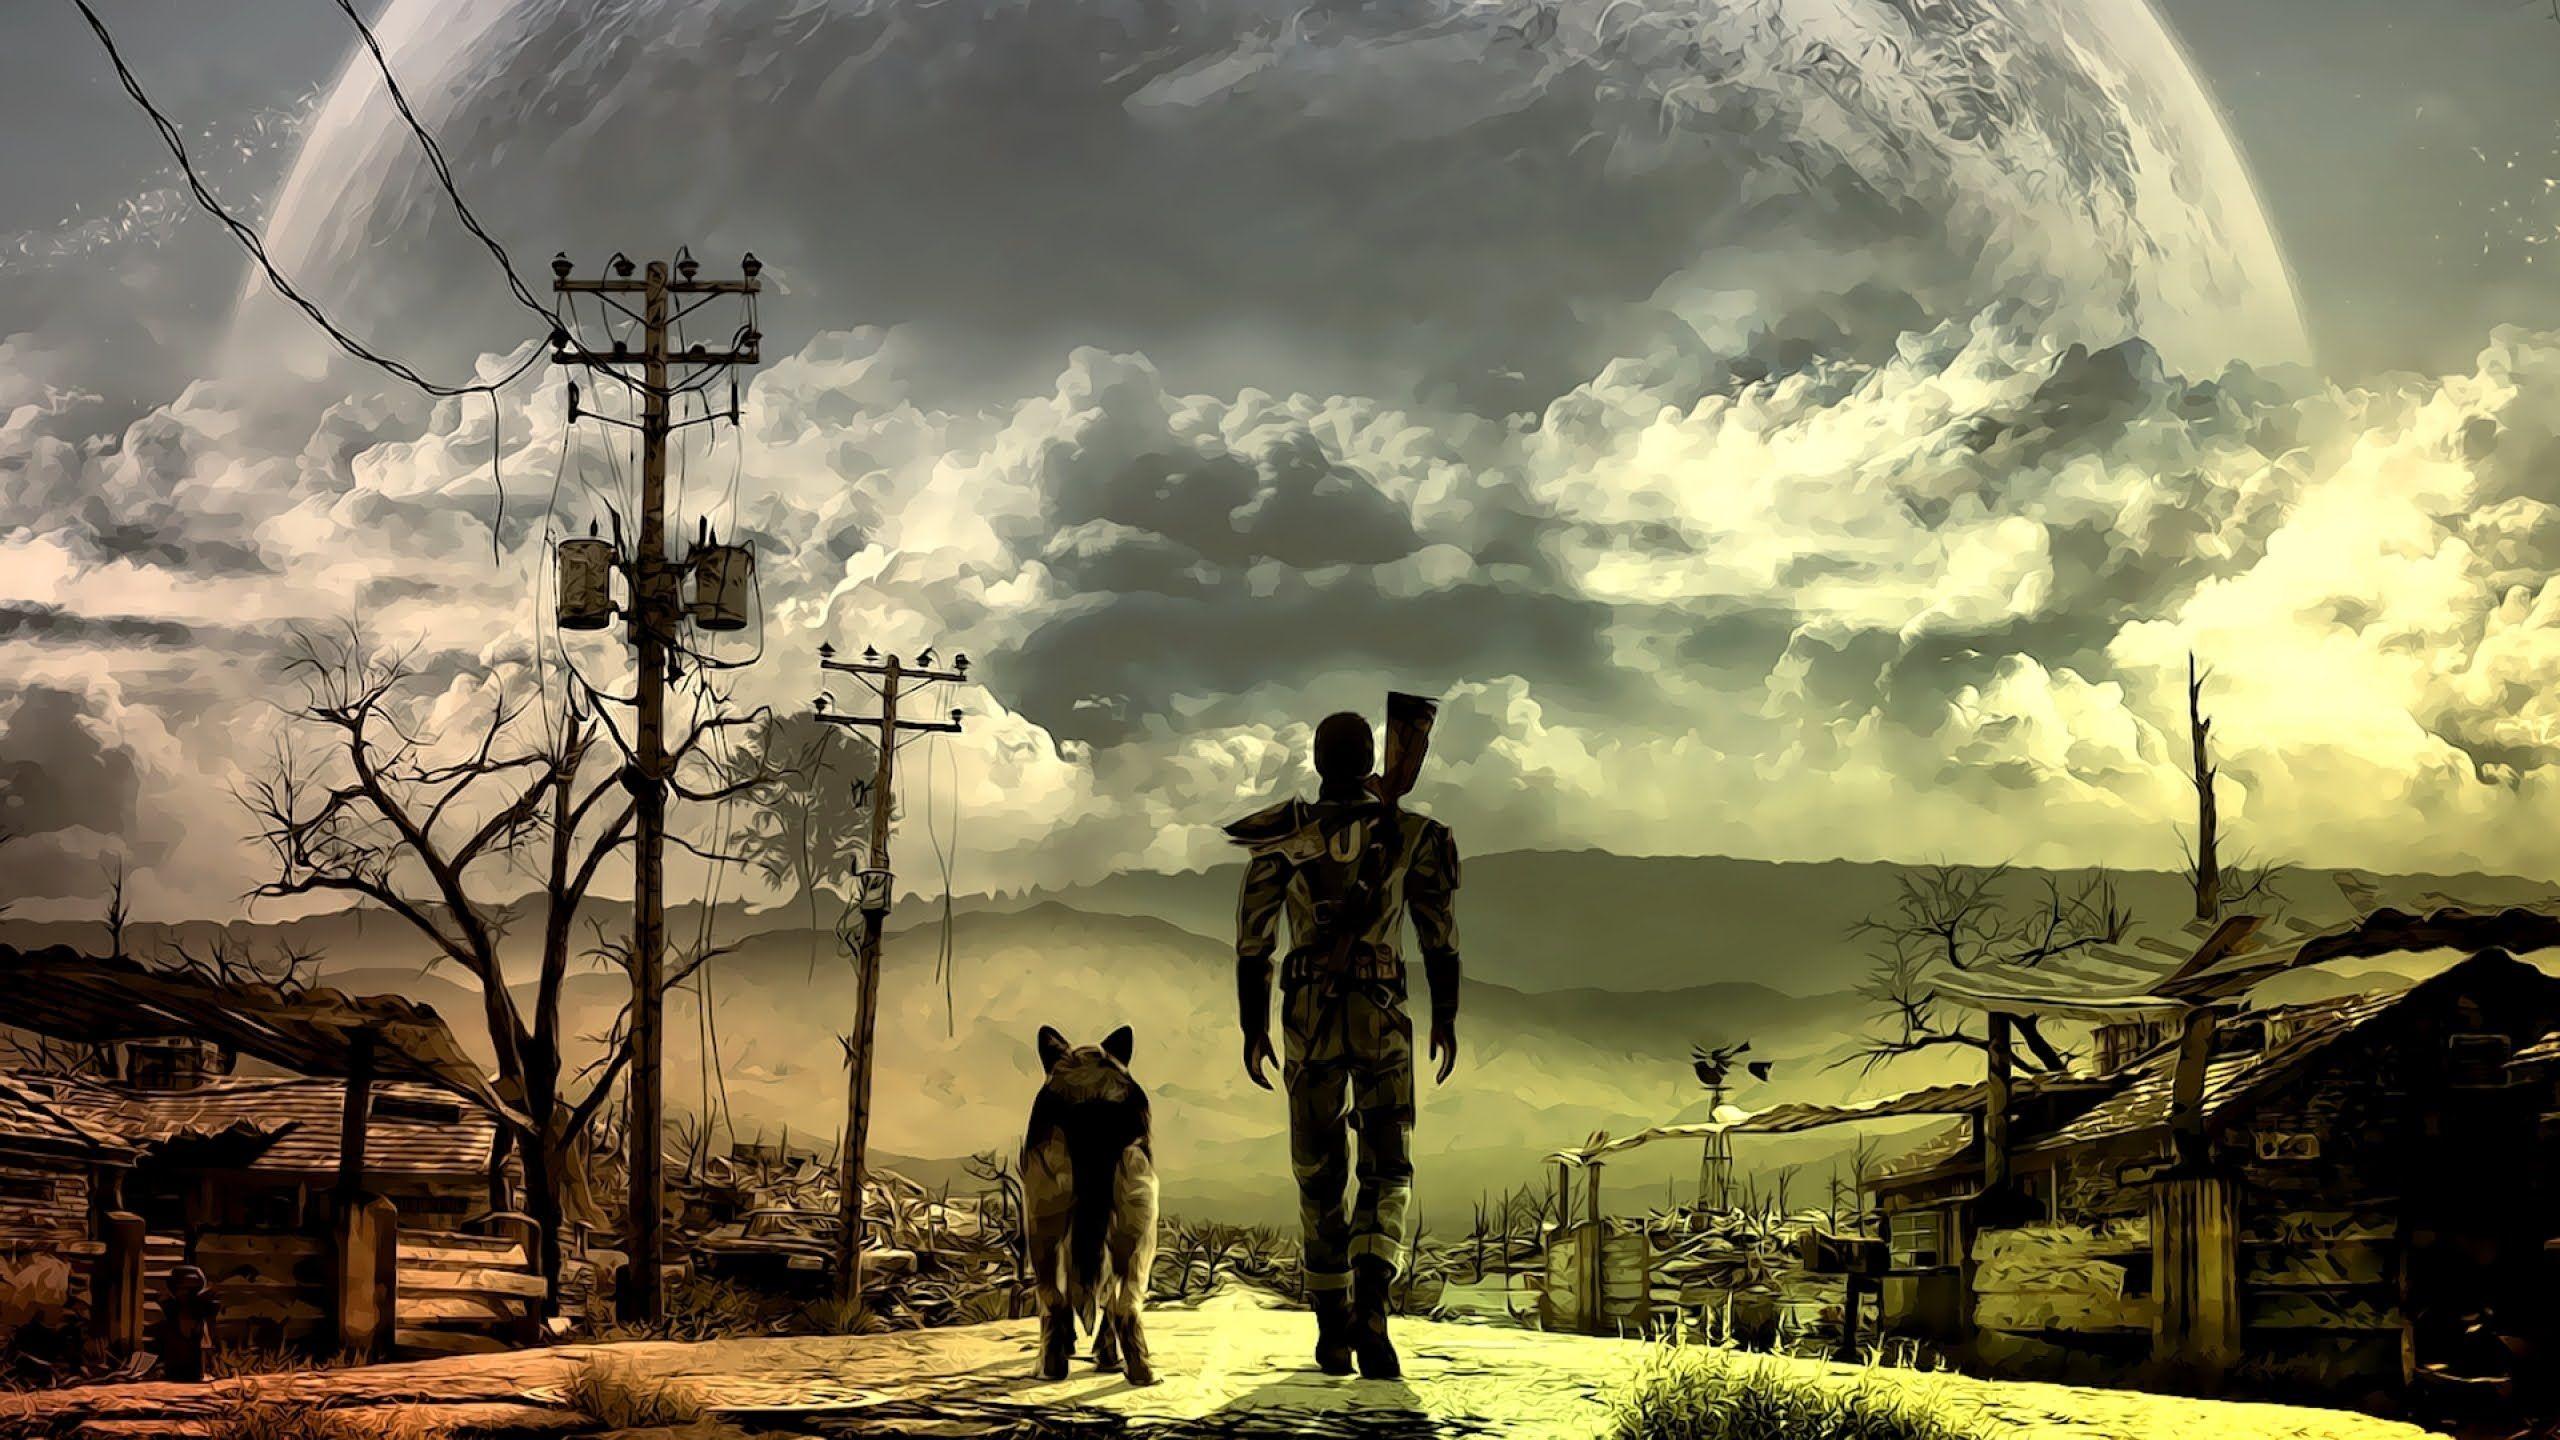 2560 x 1440 · jpeg - Fallout 4 HD wallpaper 1 Download free cool High Resolution wallpapers ...